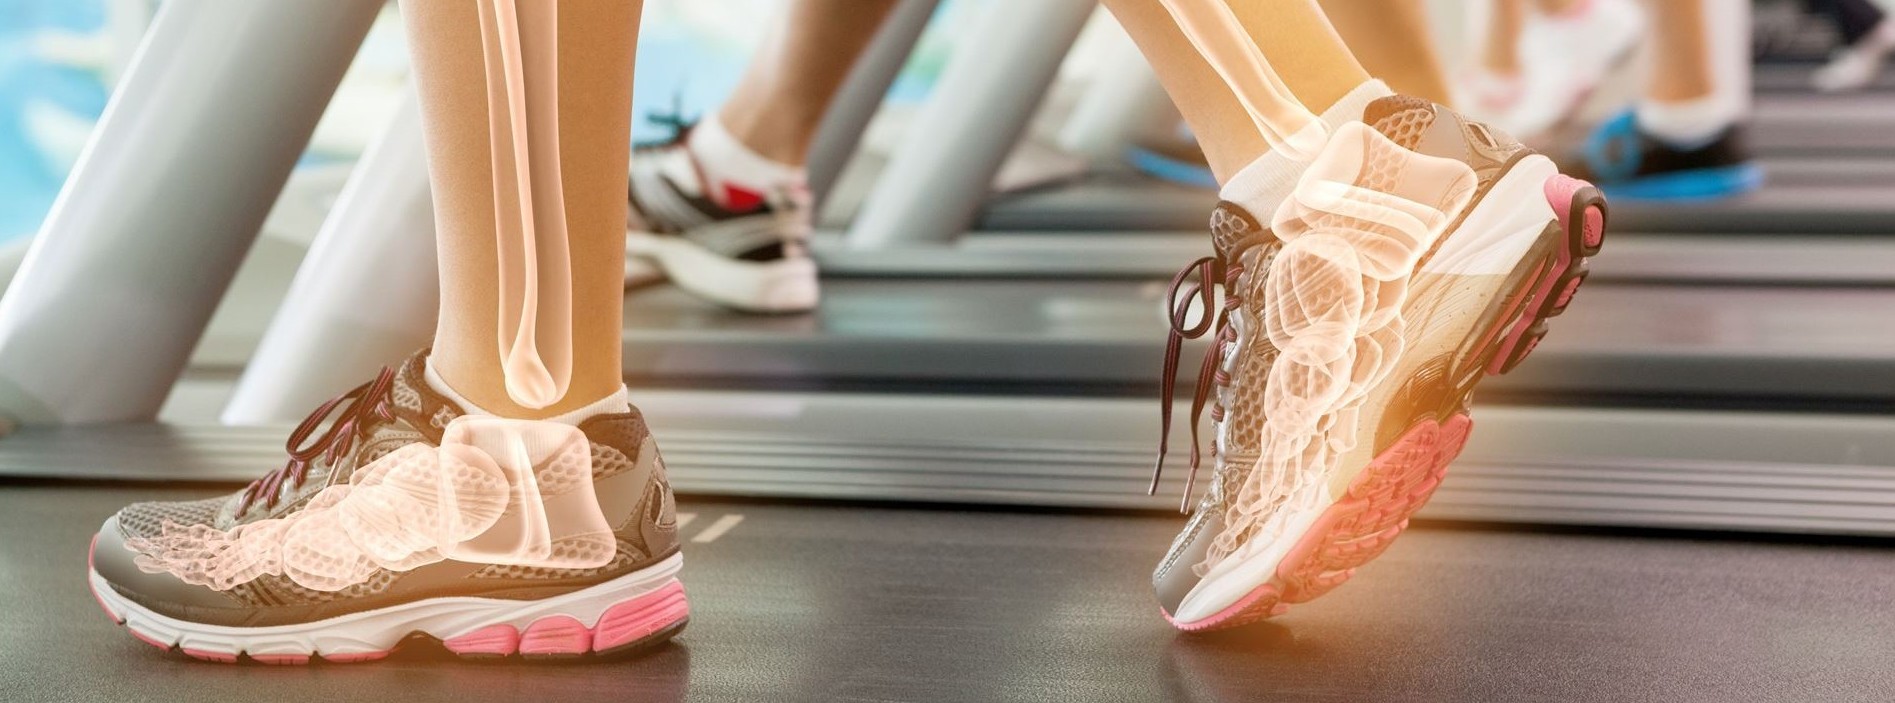 How Podiatry is Important for Your Overall Health?